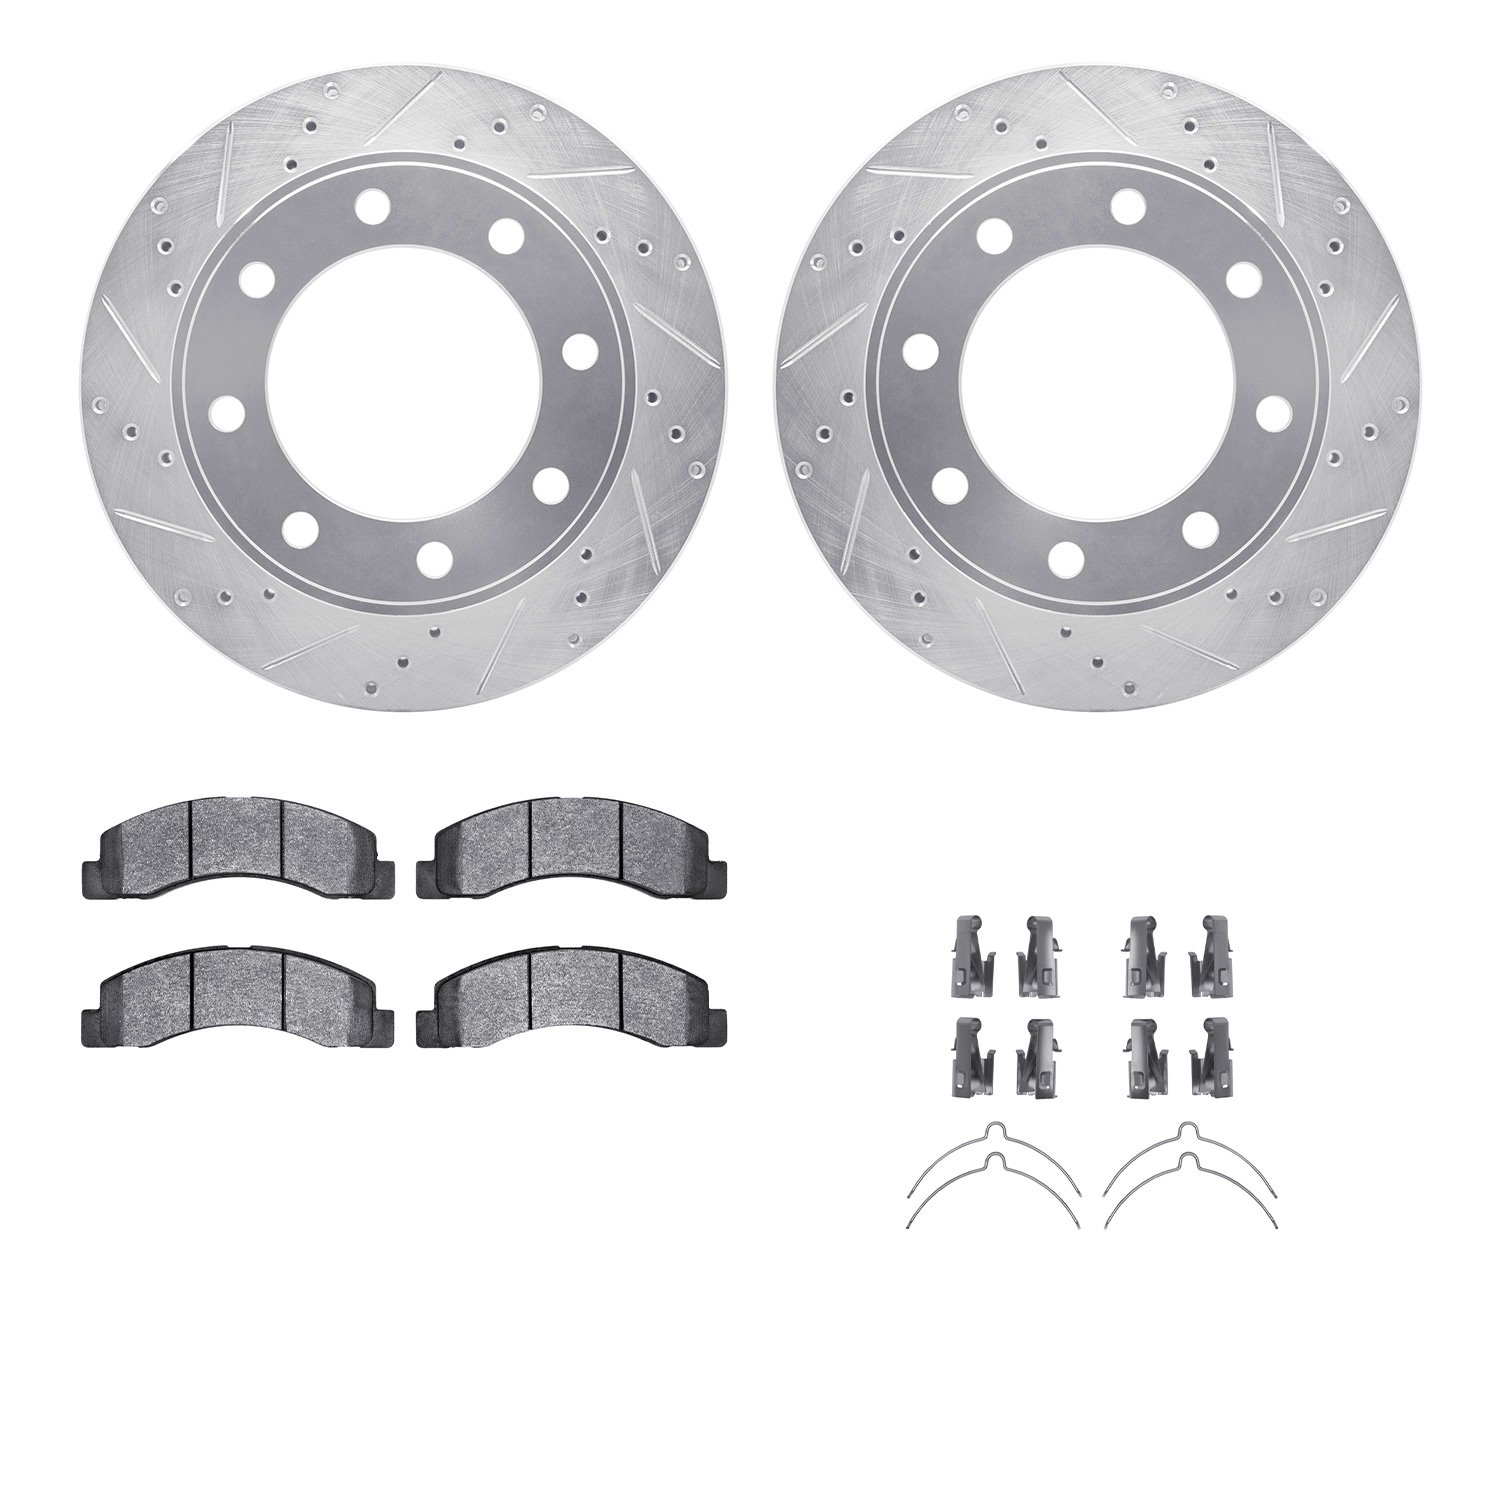 7412-54062 Drilled/Slotted Brake Rotors with Ultimate-Duty Brake Pads Kit & Hardware [Silver], 1999-2005 Ford/Lincoln/Mercury/Ma